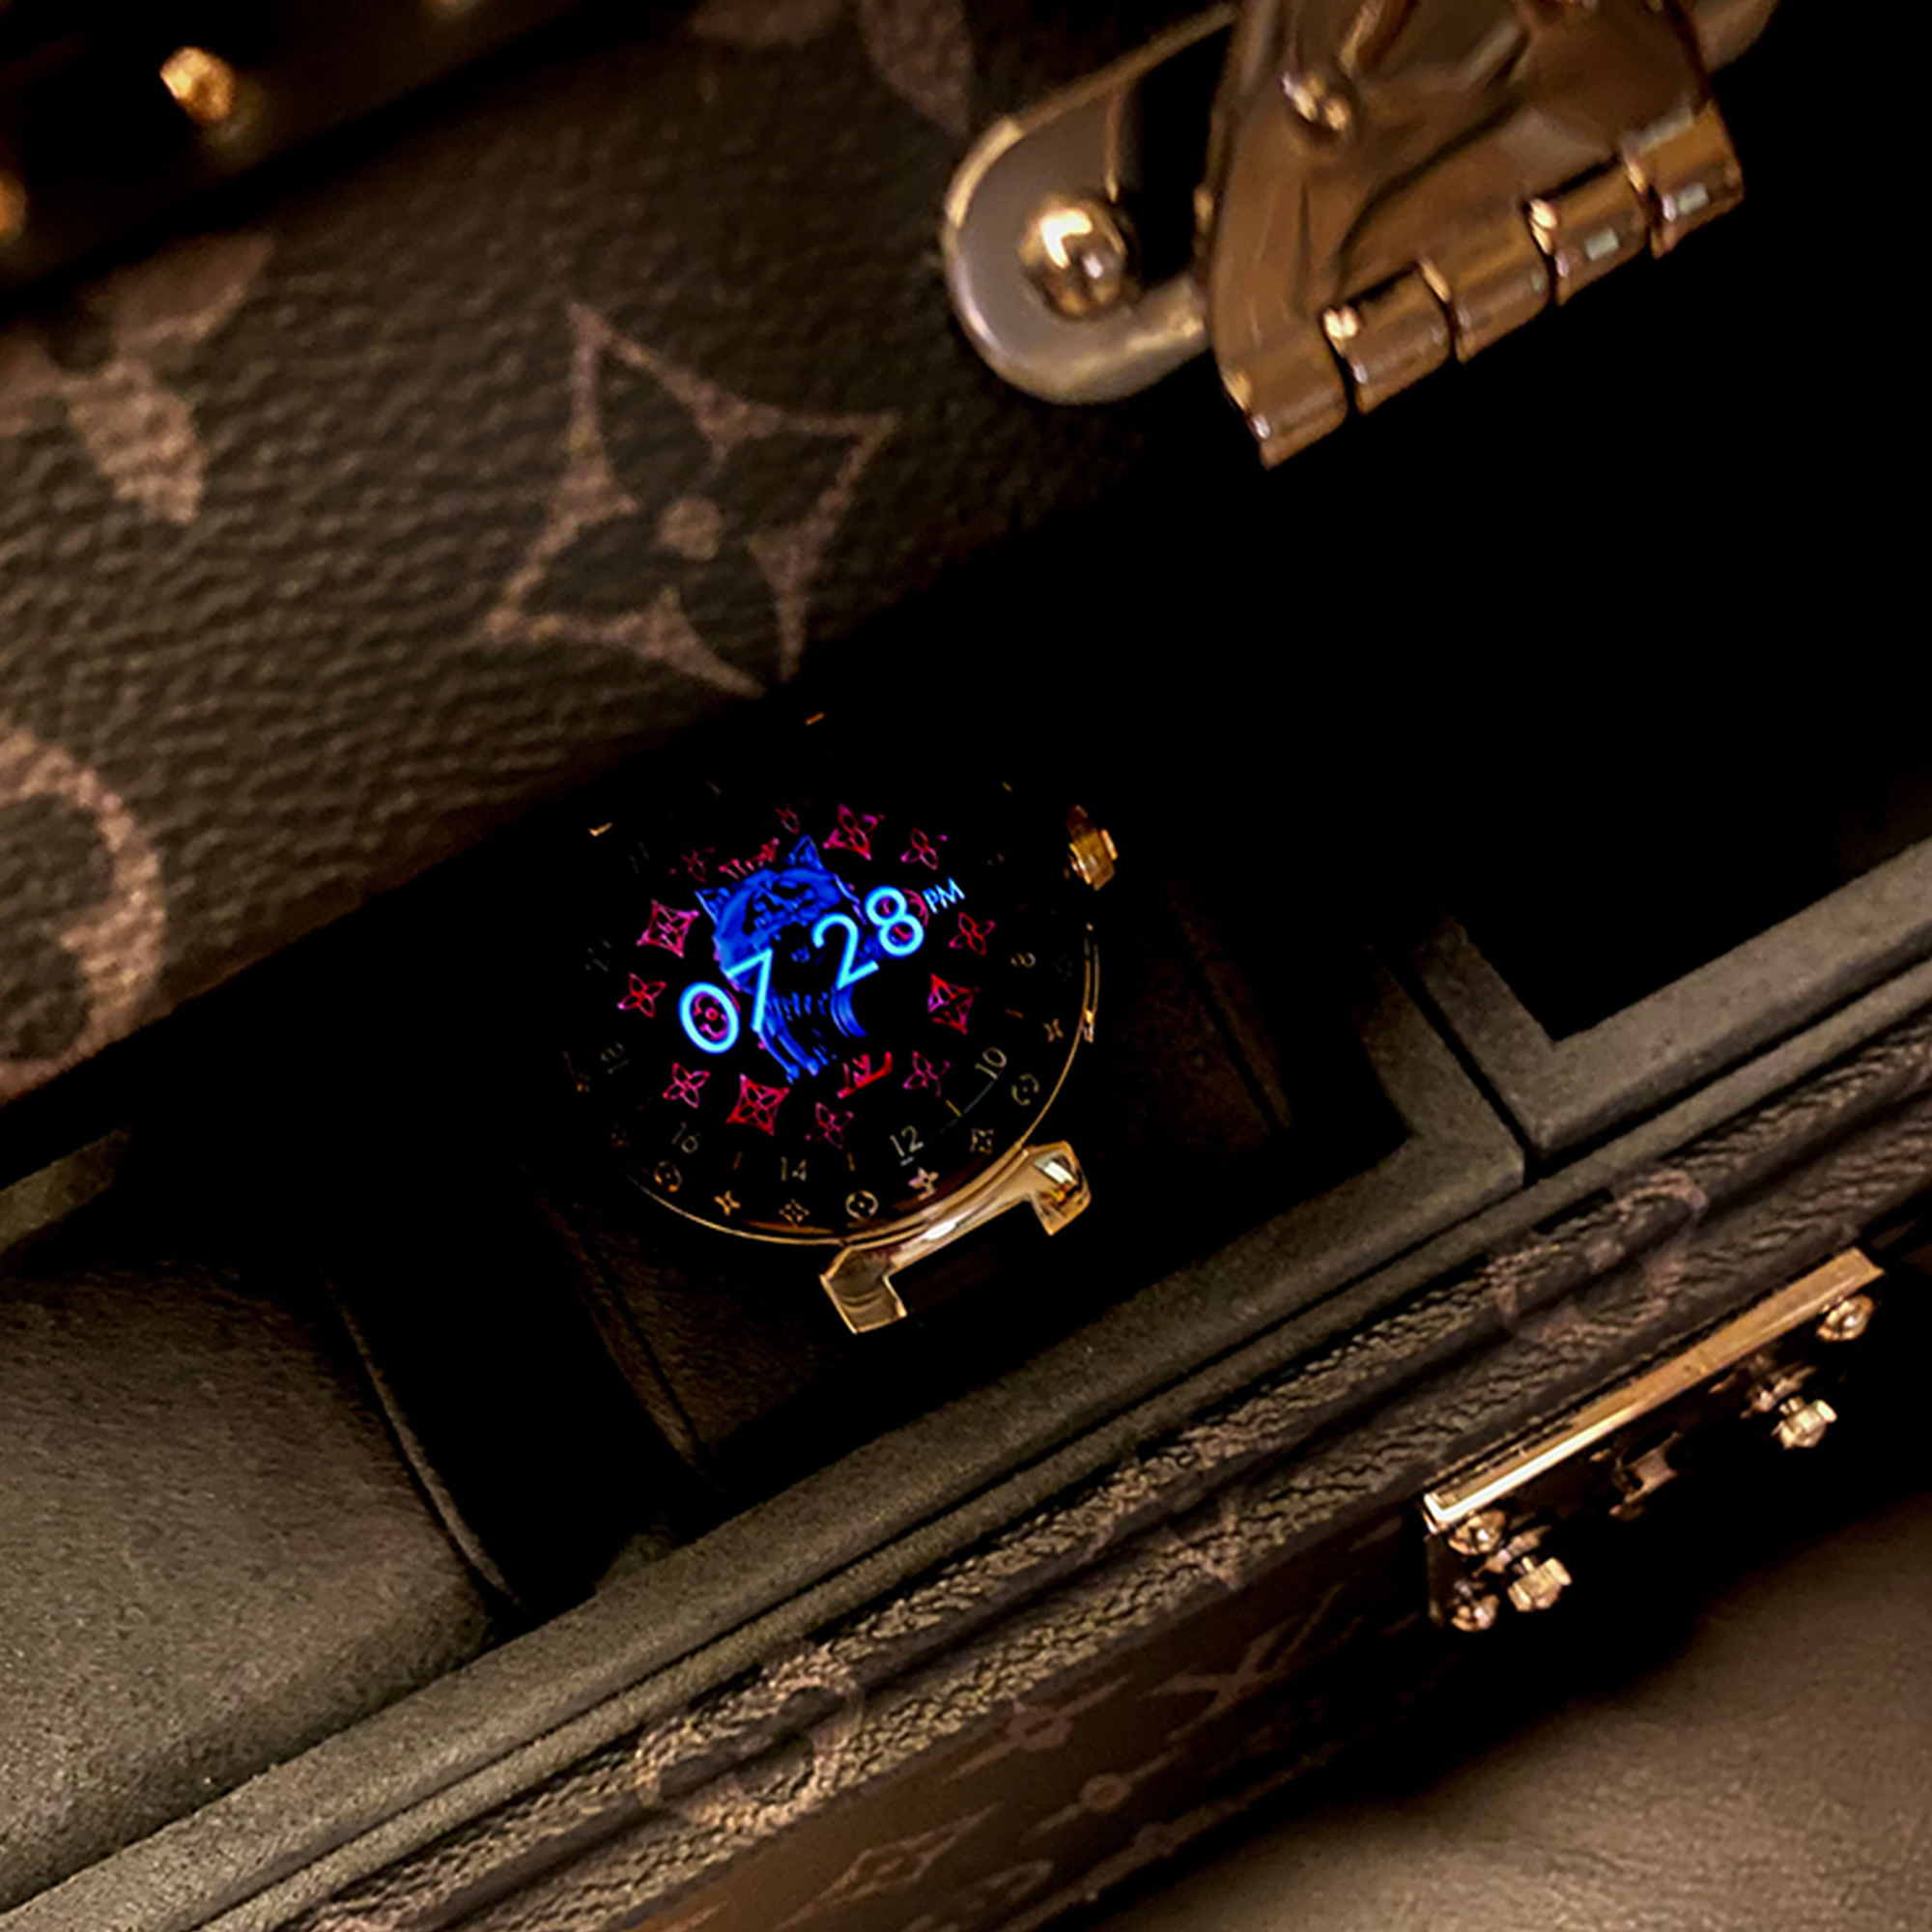 Louis Vuitton is Lighting Up Luxury with This Playful Smartwatch